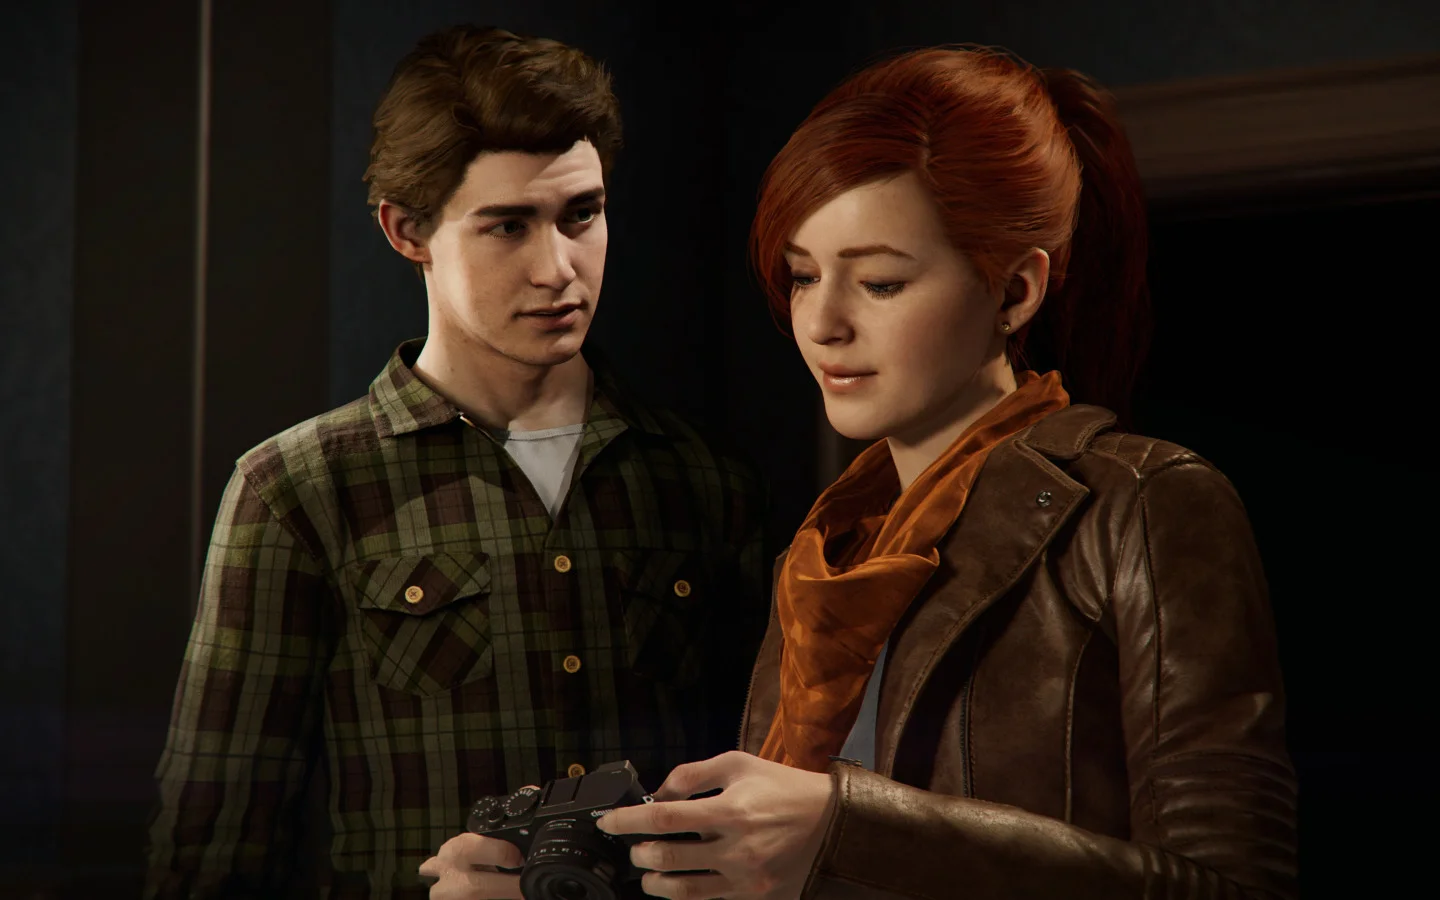 Users have chosen the best character designs for Peter Parker and Mary Jane Watson from Marvel's Spider-Man games